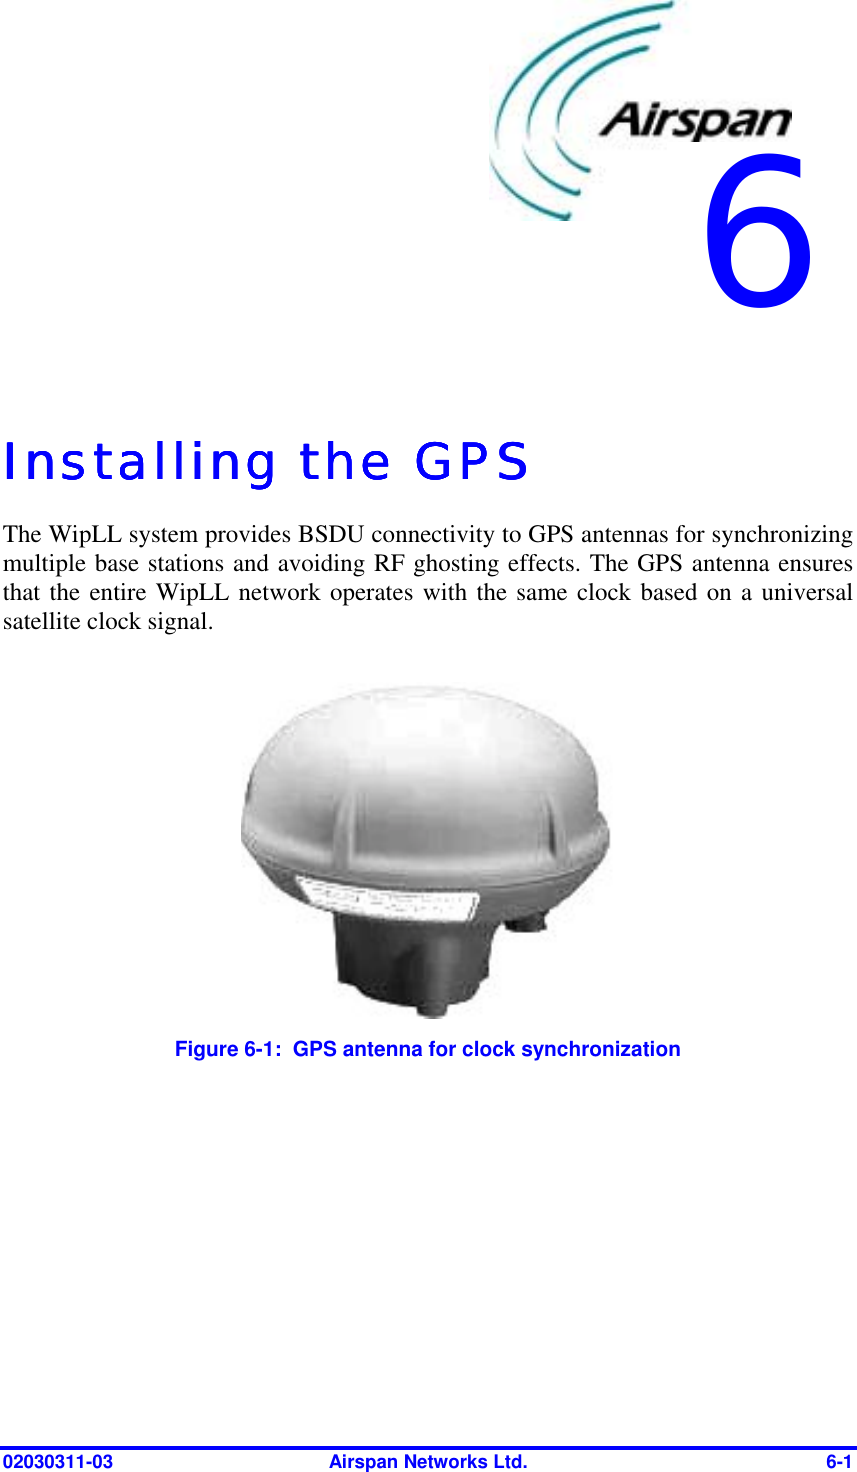  02030311-03  Airspan Networks Ltd.  6-1   Installing the GPSInstalling the GPSInstalling the GPSInstalling the GPS    The WipLL system provides BSDU connectivity to GPS antennas for synchronizing multiple base stations and avoiding RF ghosting effects. The GPS antenna ensures that the entire WipLL network operates with the same clock based on a universal satellite clock signal.   Figure  6-1:  GPS antenna for clock synchronization 6 